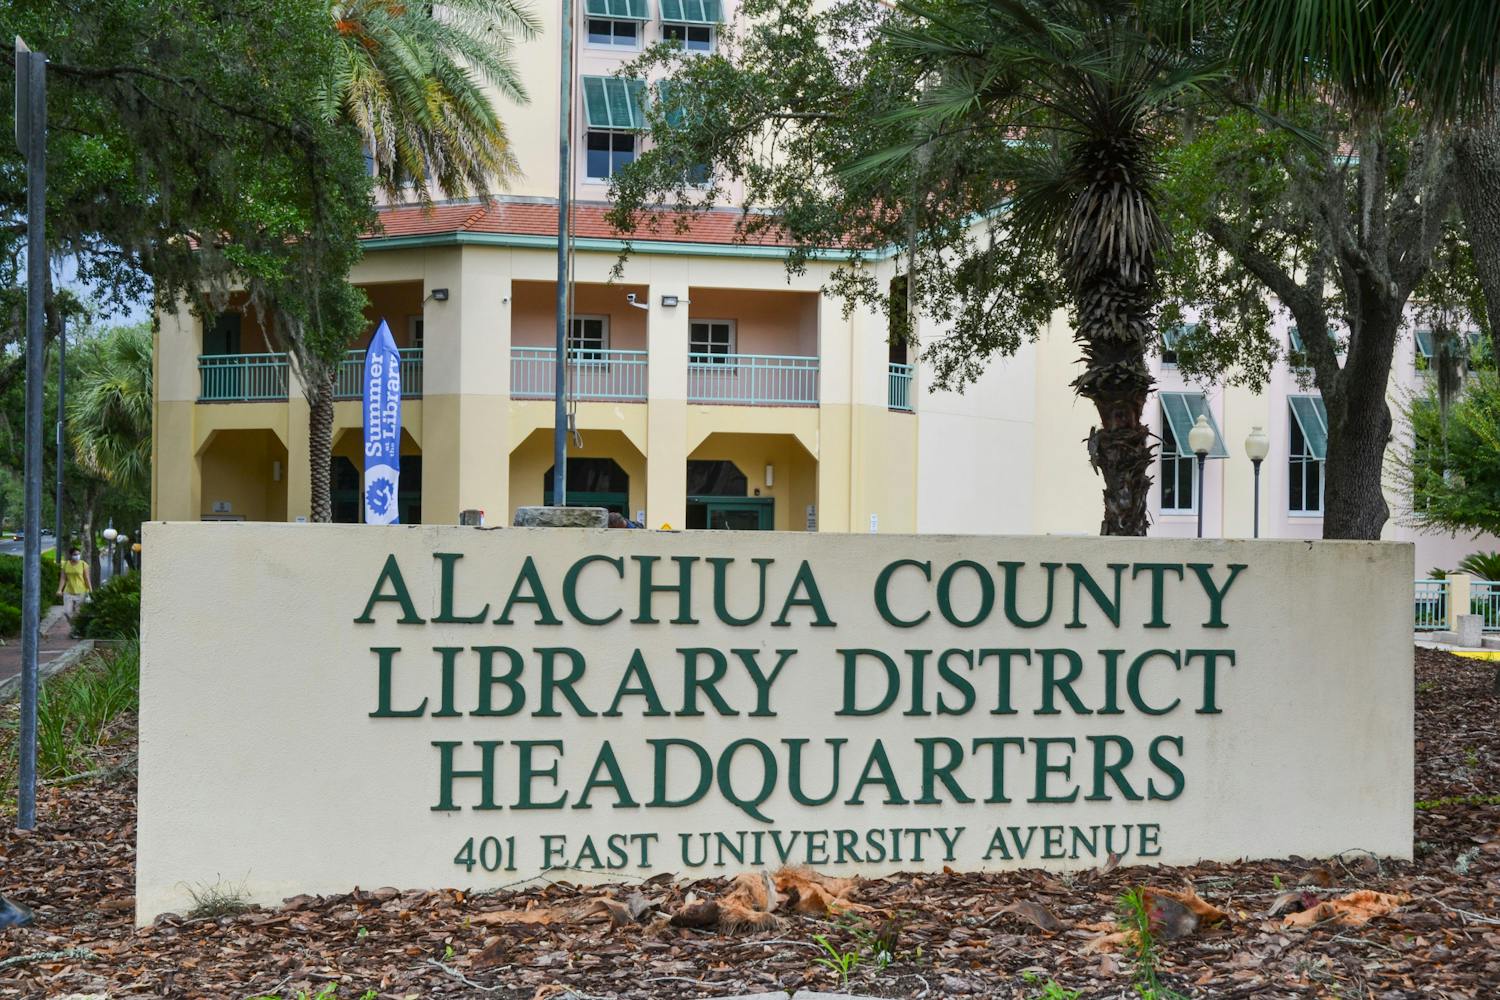 The Alachua County Library District downtown headquarters, located at 401 E University Ave in Gainesville on Monday, July 12, 2021. The Alachua County Library District is hosting its eighth annual summer art show in August; due to the COVID-19 pandemic, this year's event is virtual. 